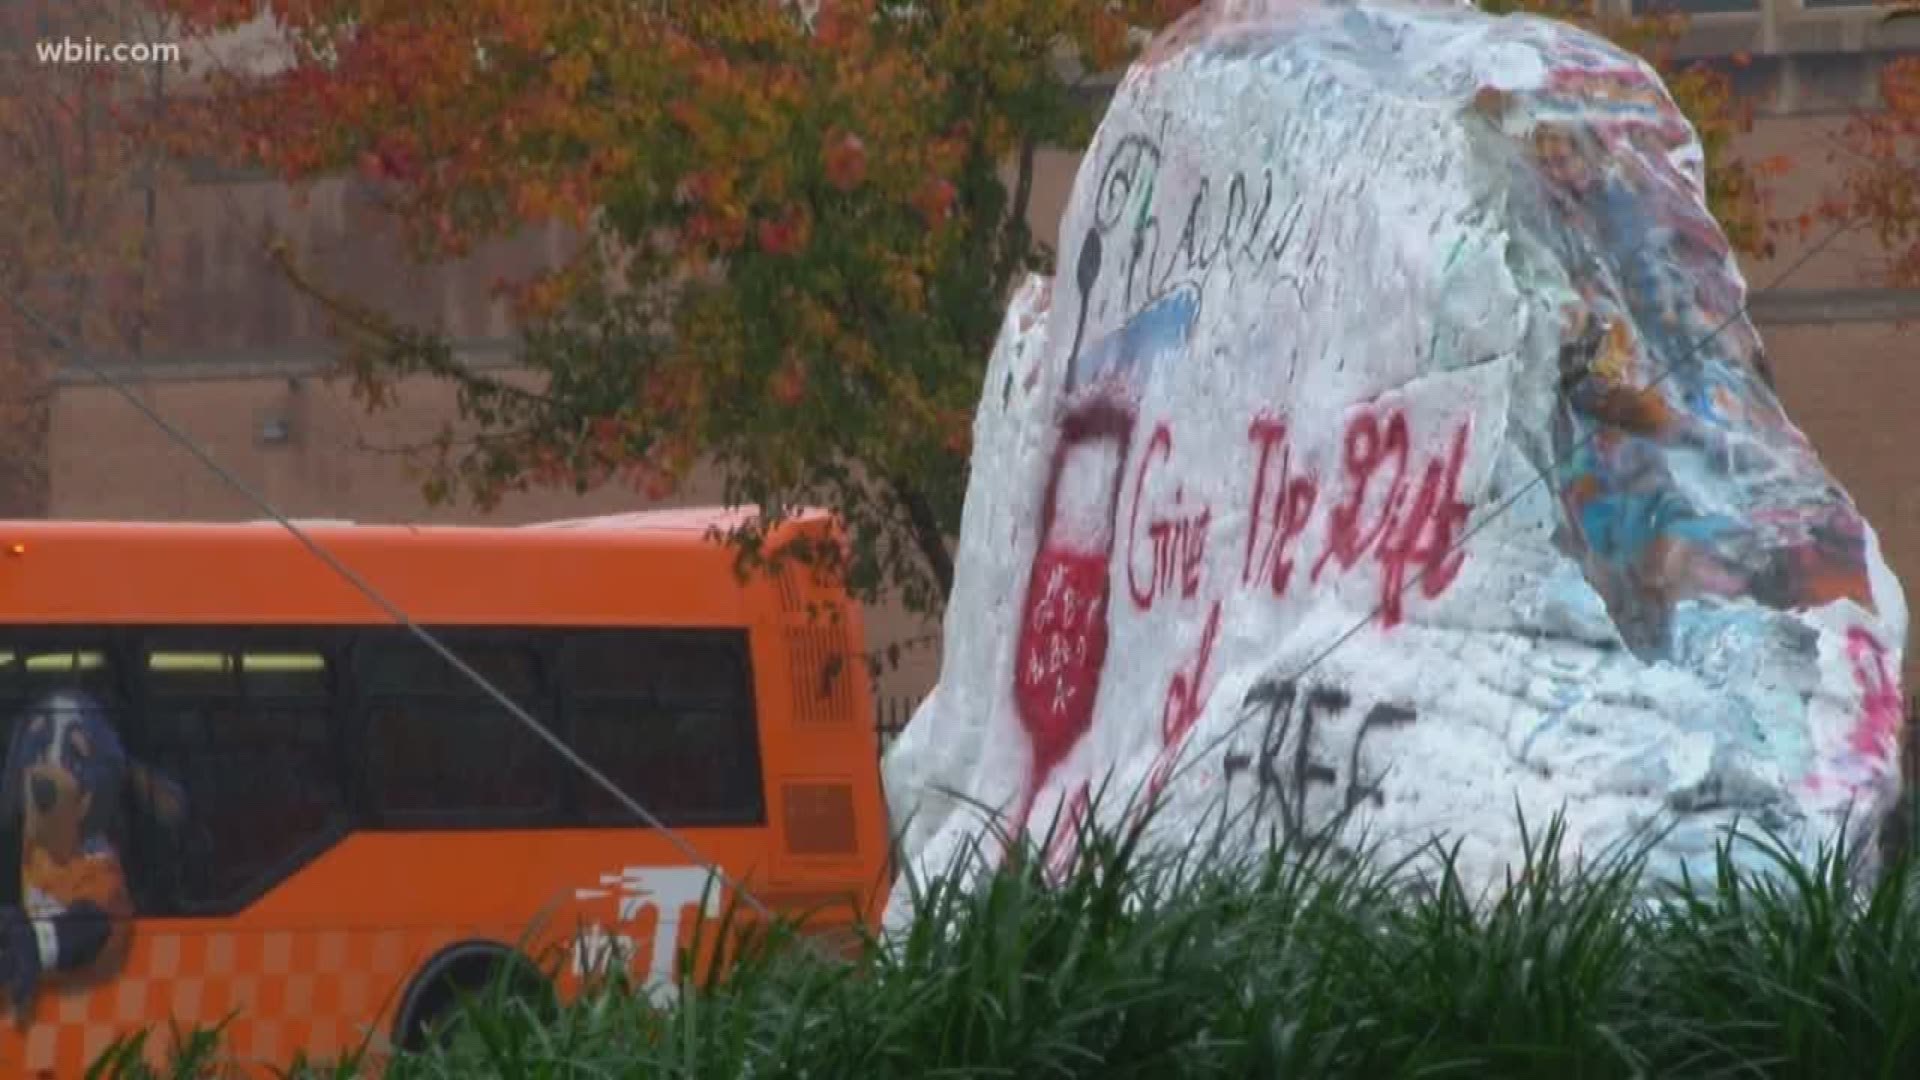 The symbols of hate went up Saturday night. Since then, they've been painted over with messages of unity. Many of people asked why campus police aren't doing more to prevent hate speech..